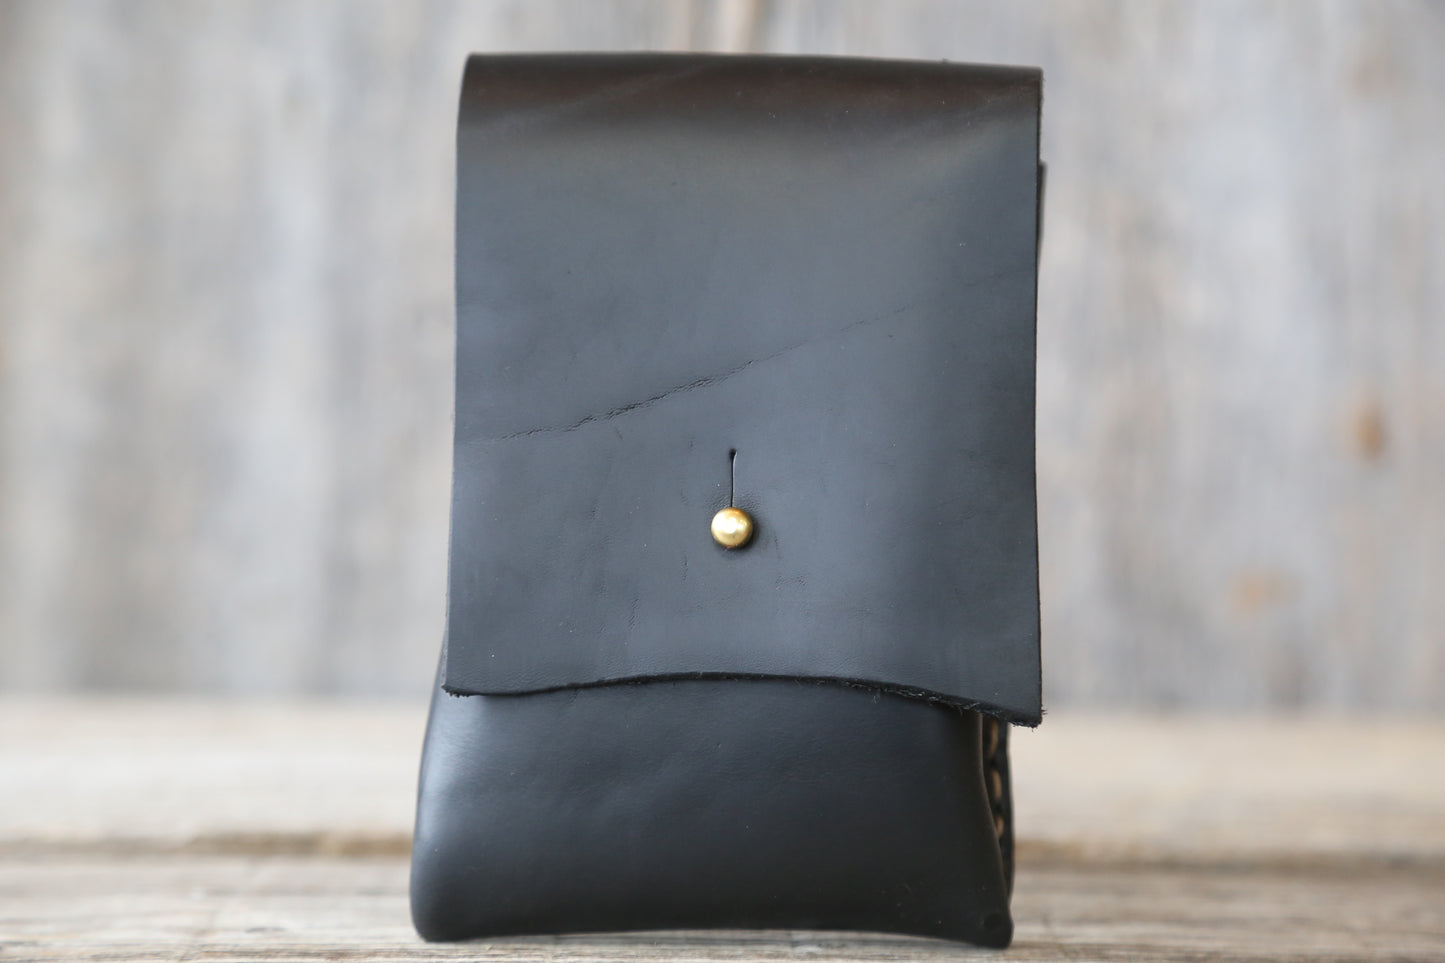 Horween Leather Zipper Wallet: North Star Leather Co.